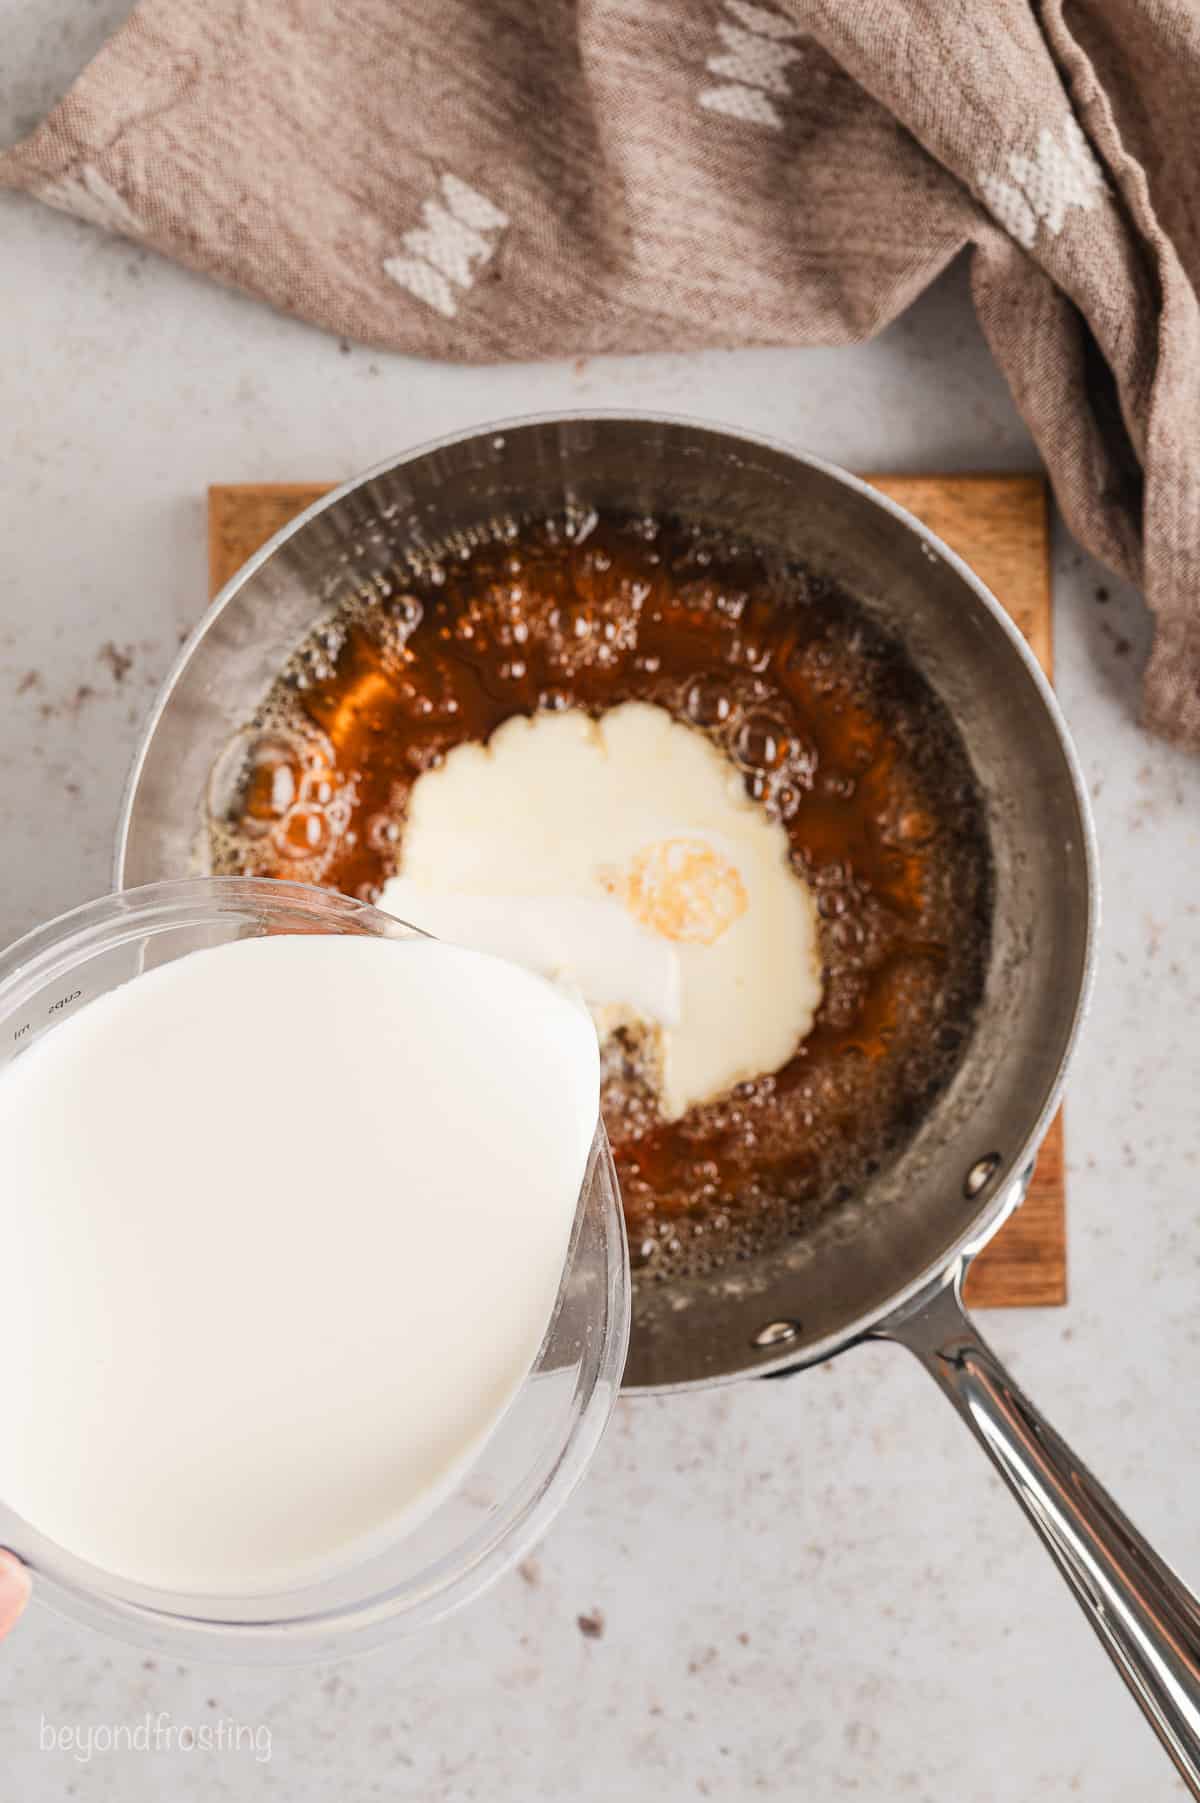 Heavy cream being poured into boiling sugar syrup in a saucepan on an induction stove.